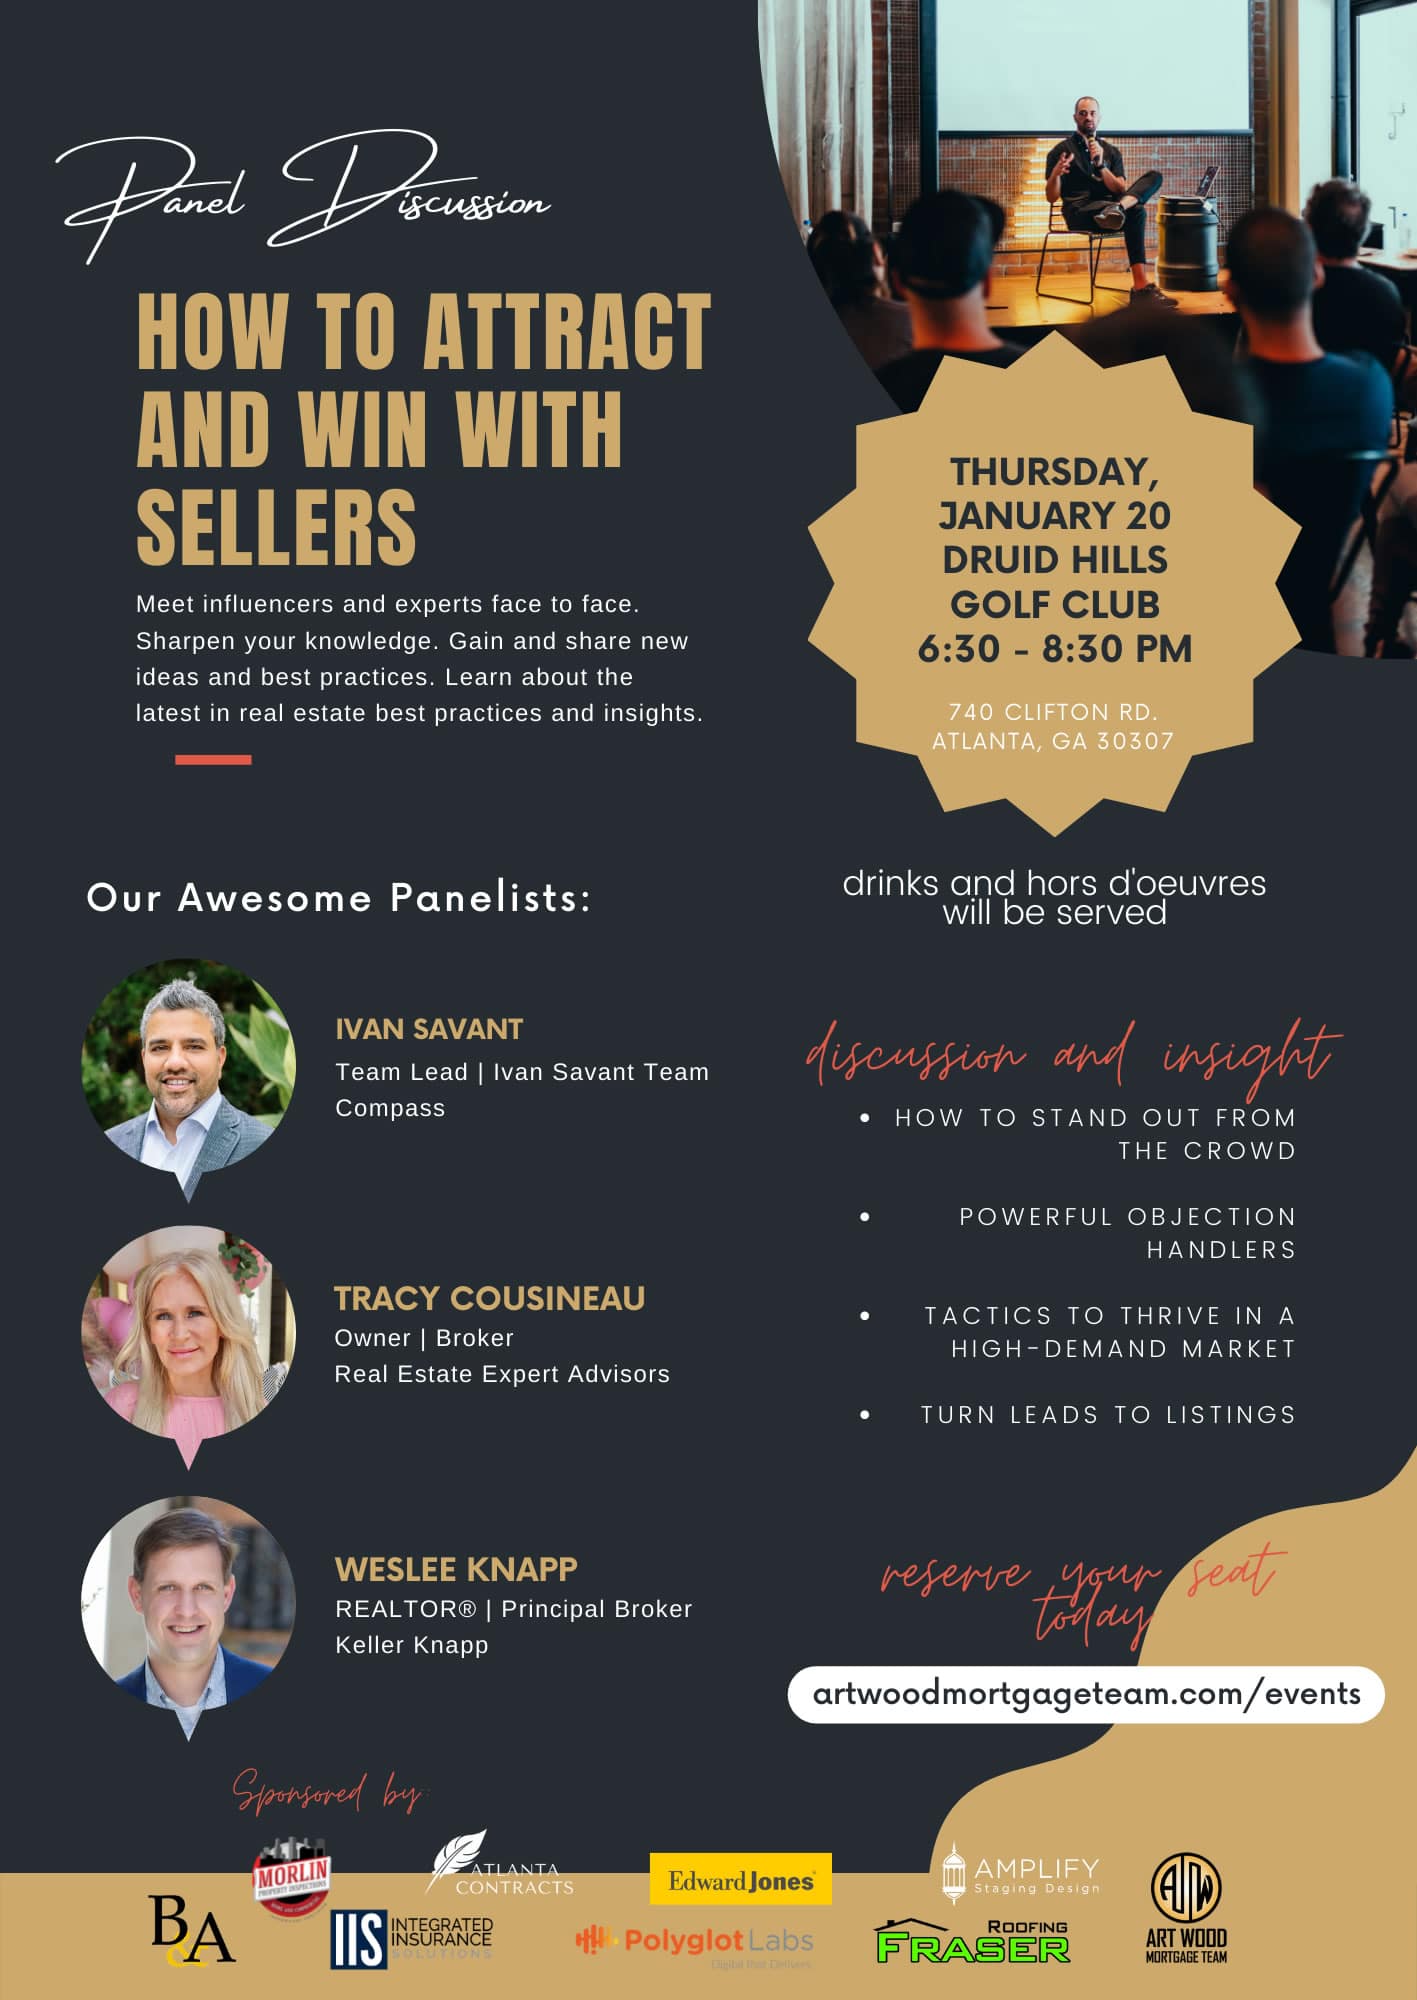   Join us as we learn from Atlanta's Top Real Estate Agents in a Panel Discussion where they share their secrets on "How to Attract and Win with Sellers". Come meet Weslee Knapp from Keller Knapp, Ivan Savant from Compass, and Tracy Cousineau from Real Estate Expert Advisors.     You all know that listings are the engine that power a successful real estate business. They bring exposure, buyer leads, and even more seller leads. And in a tight inventory market, where every listing counts, agents must be confident and skilled at both sourcing and converting seller leads. To help you achieve the success needed to take your business to the next level, we’ve brought on the top listing agents who have established themselves as the go-to expert for sellers in their market centers!     Join us at the Druid Hills Golf Club for drinks and hors d'oeuvres on Thursday, January 20 from 6:30 PM to 8:30 PM and learn:      How to stand out from the crowd     Powerful objection handling     Tactics to thrive in a high-demand market     How to turn leads in to listings